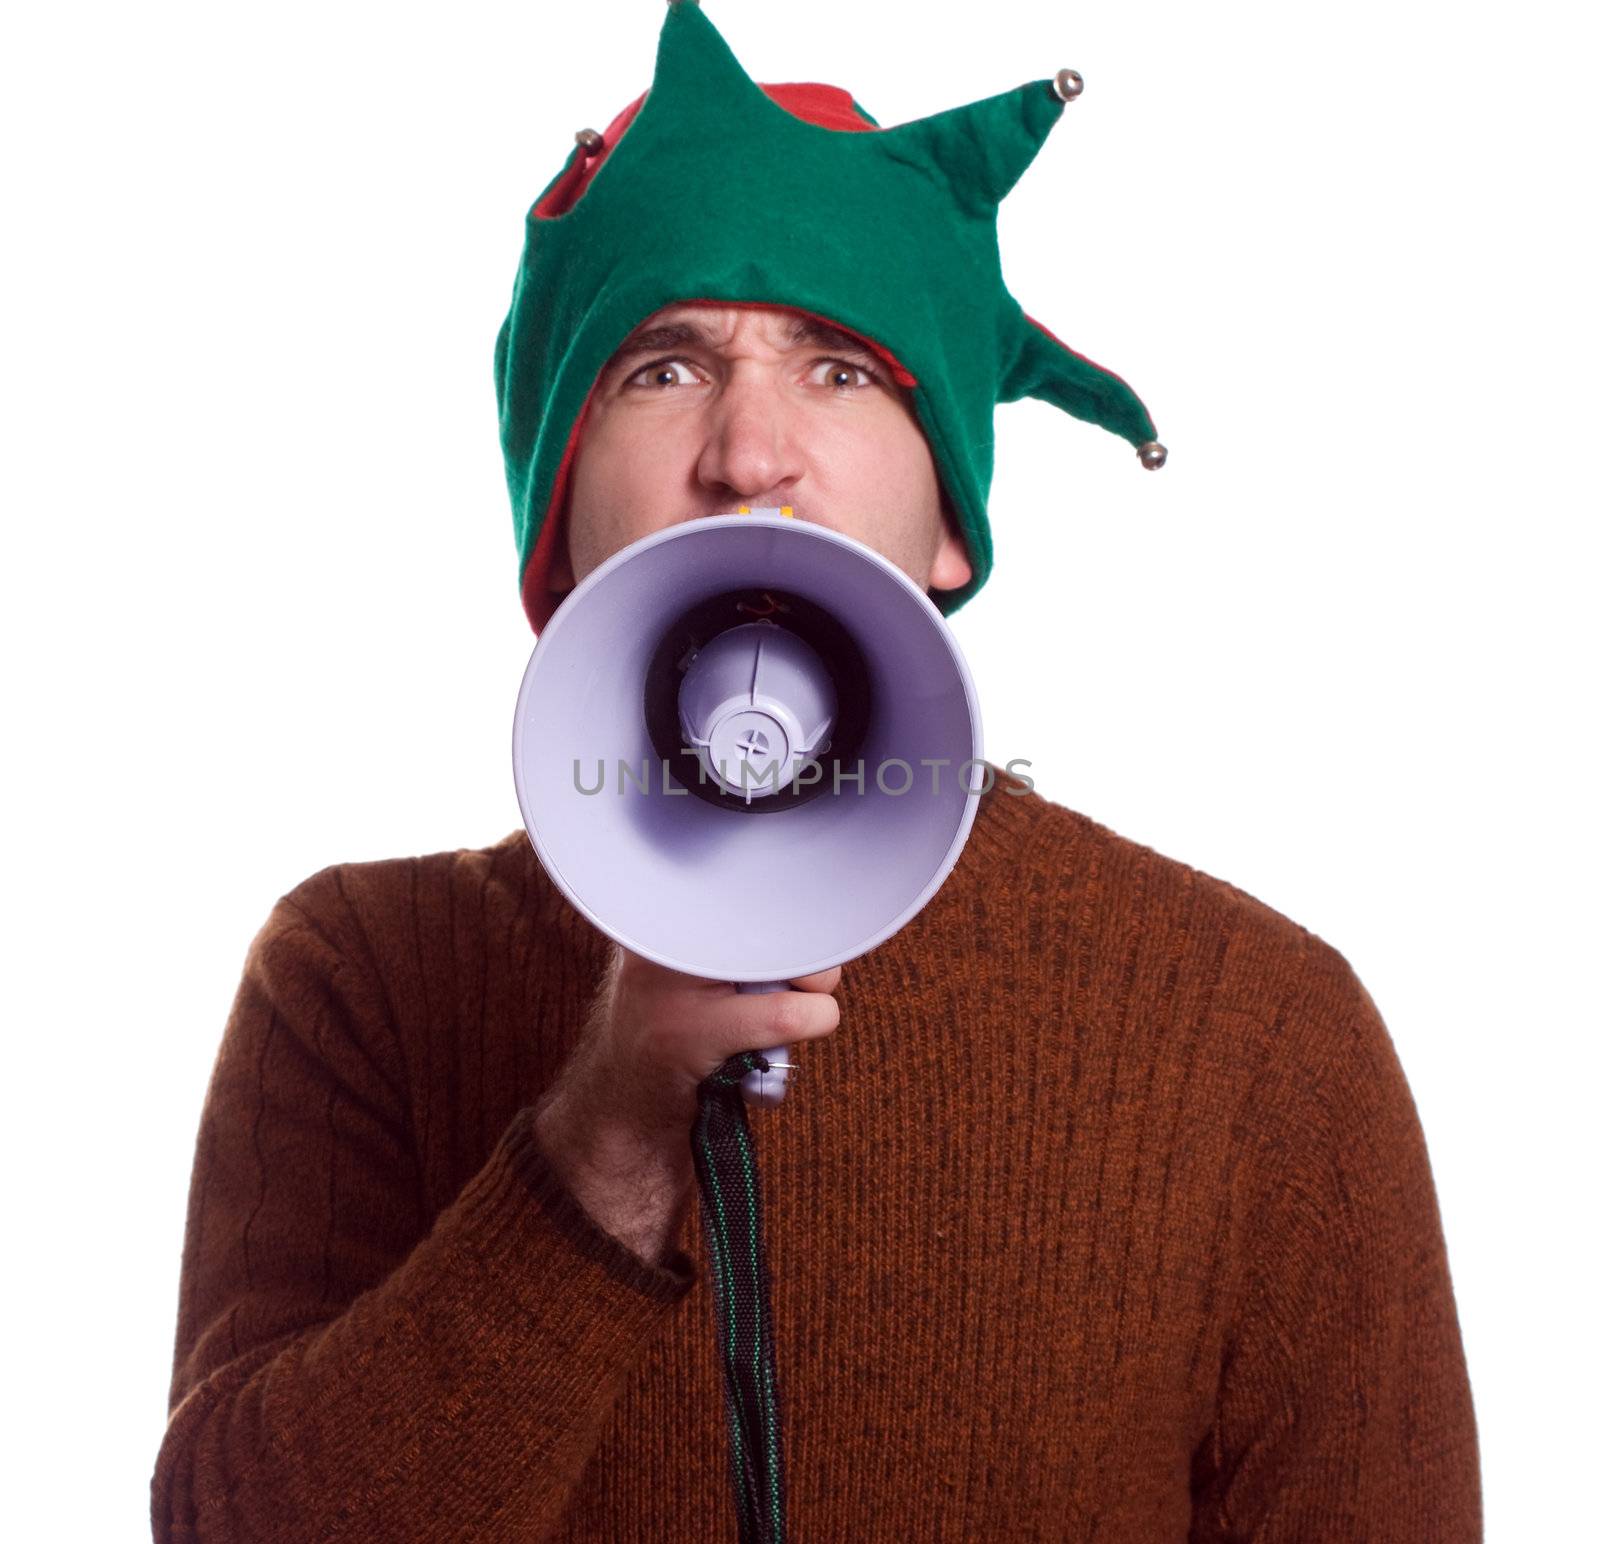 An adult Christmas elf is using a megaphone to yell at the viewer and is isolated against a white background